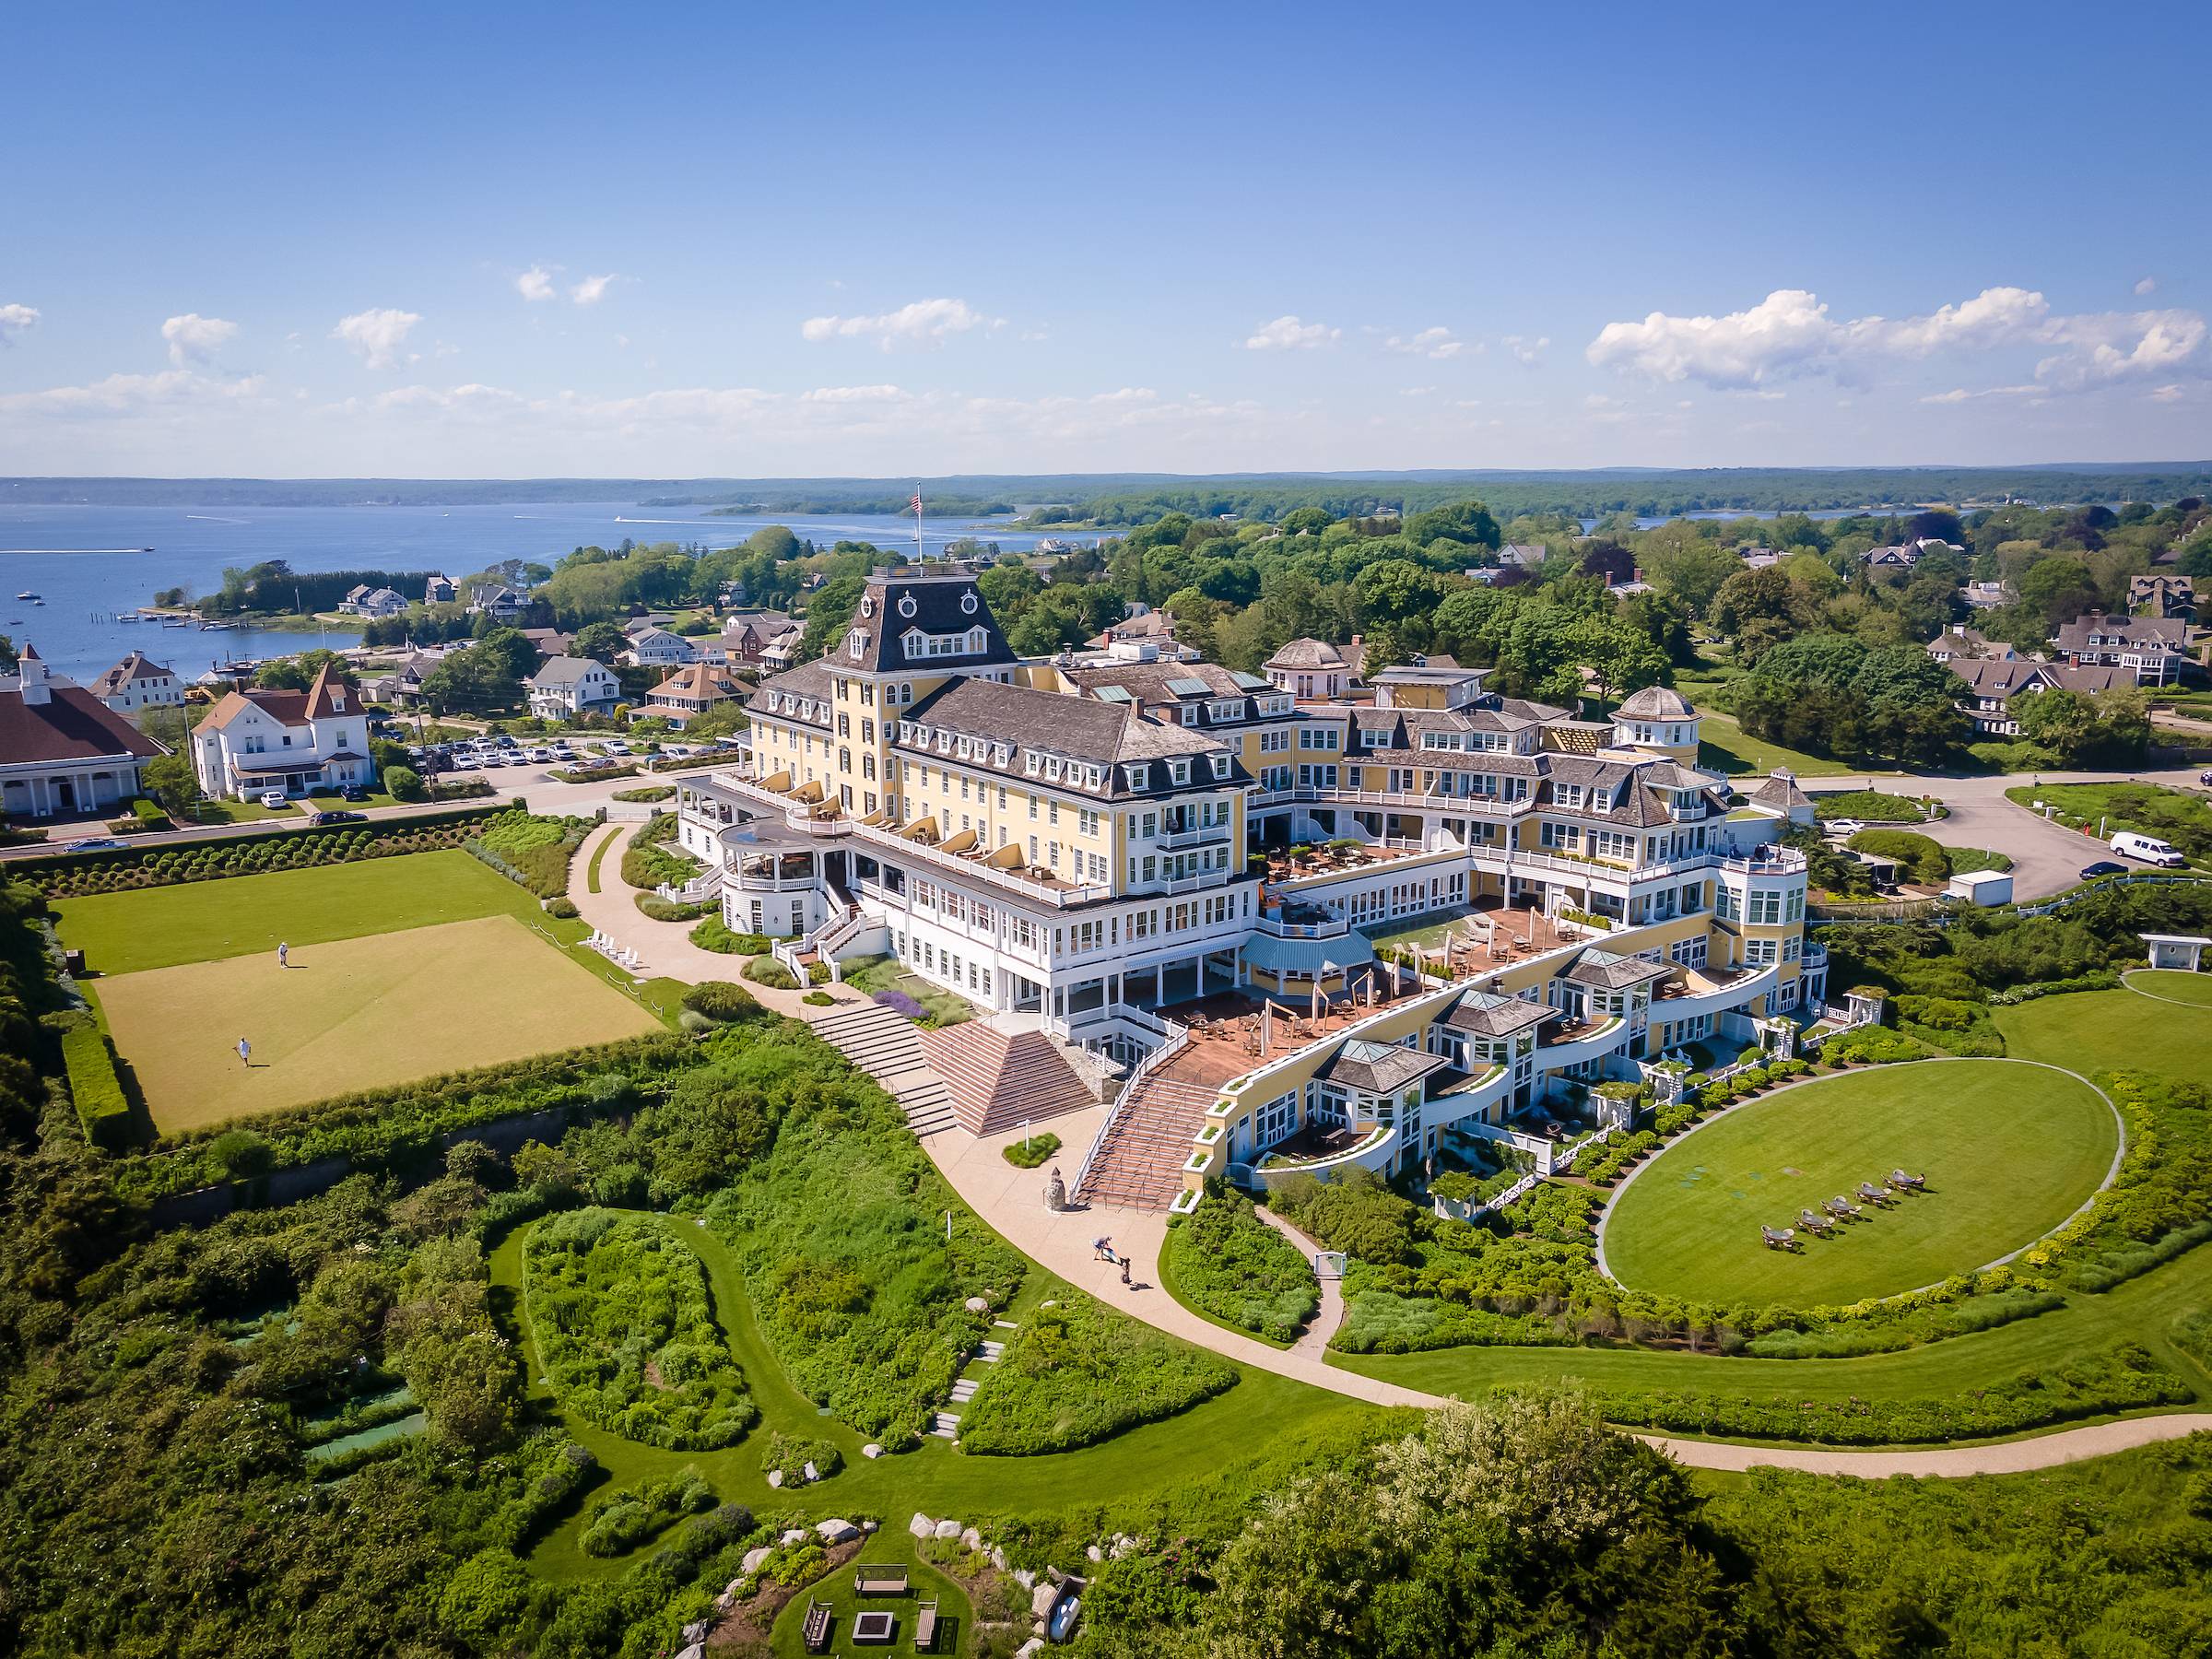 An aerial view of Ocean House Hotel.